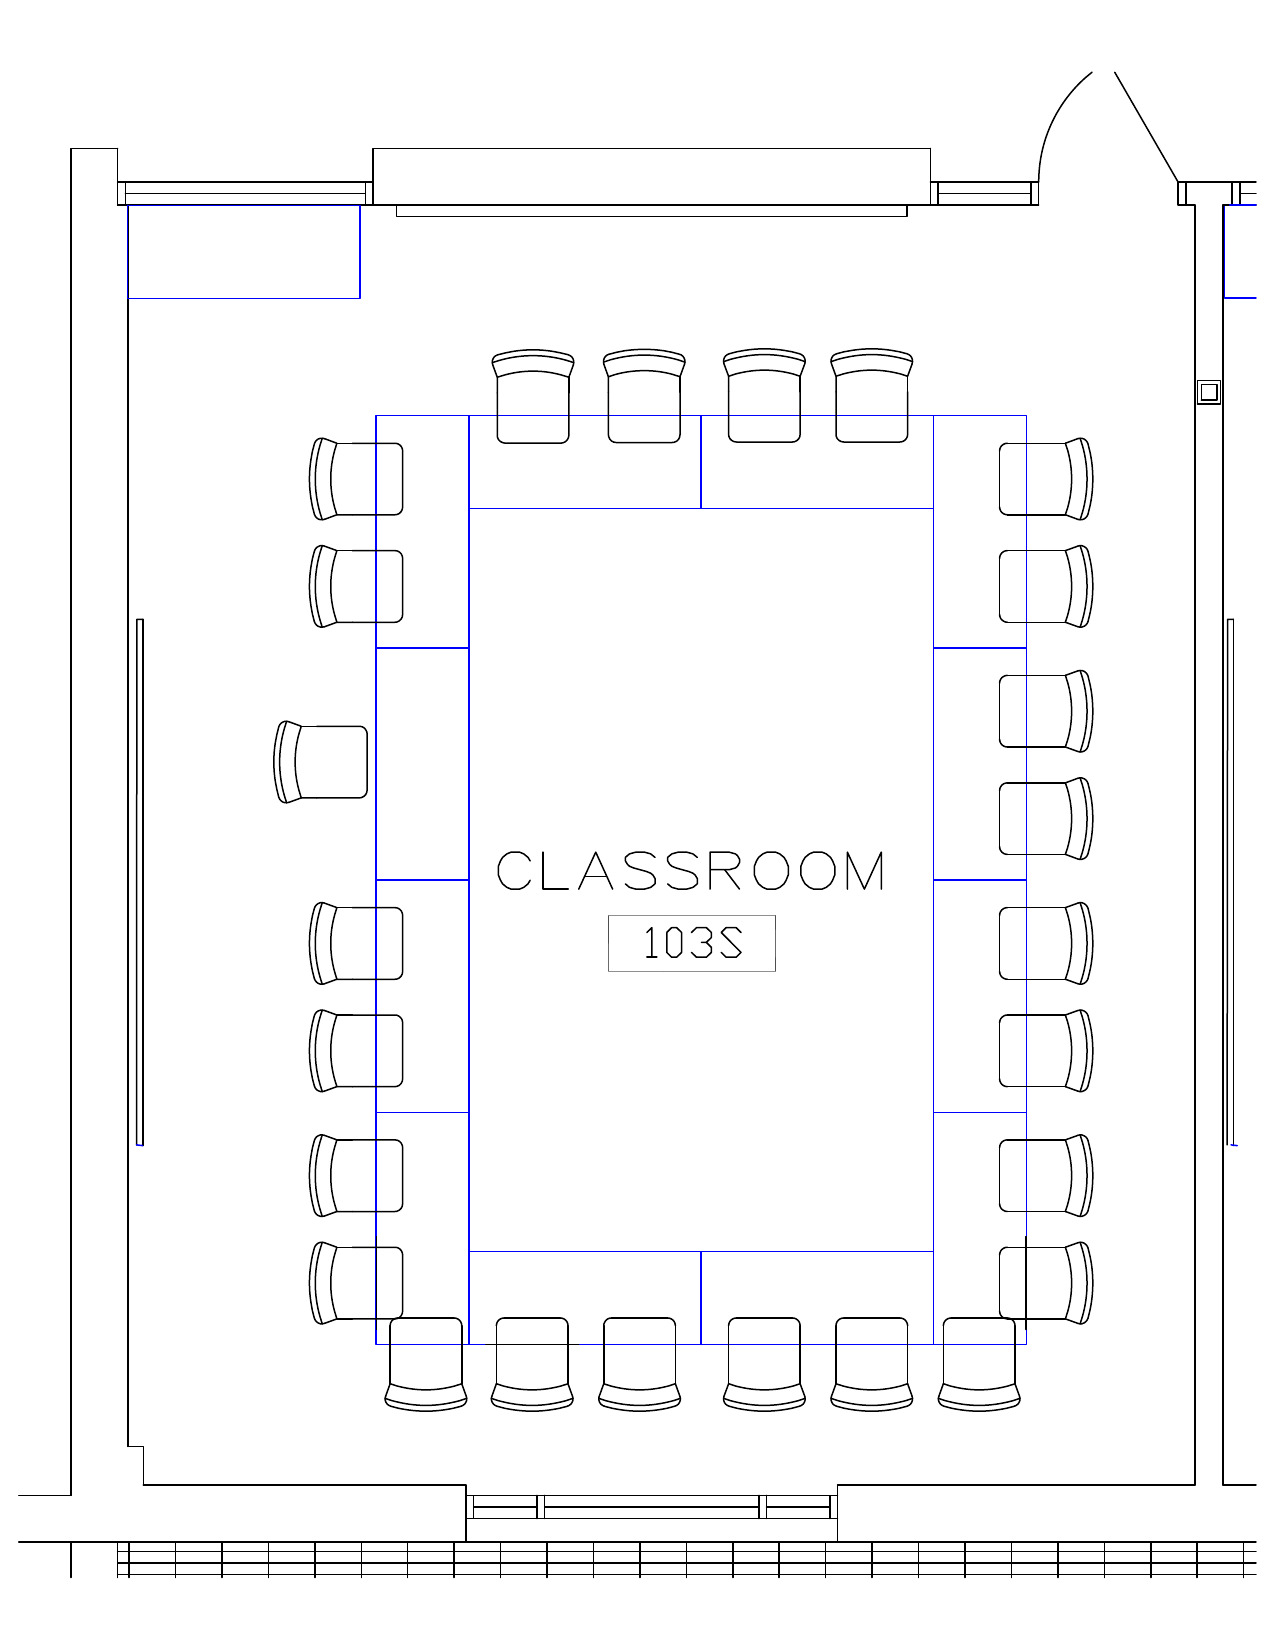 Seating chart of Roberts South 103